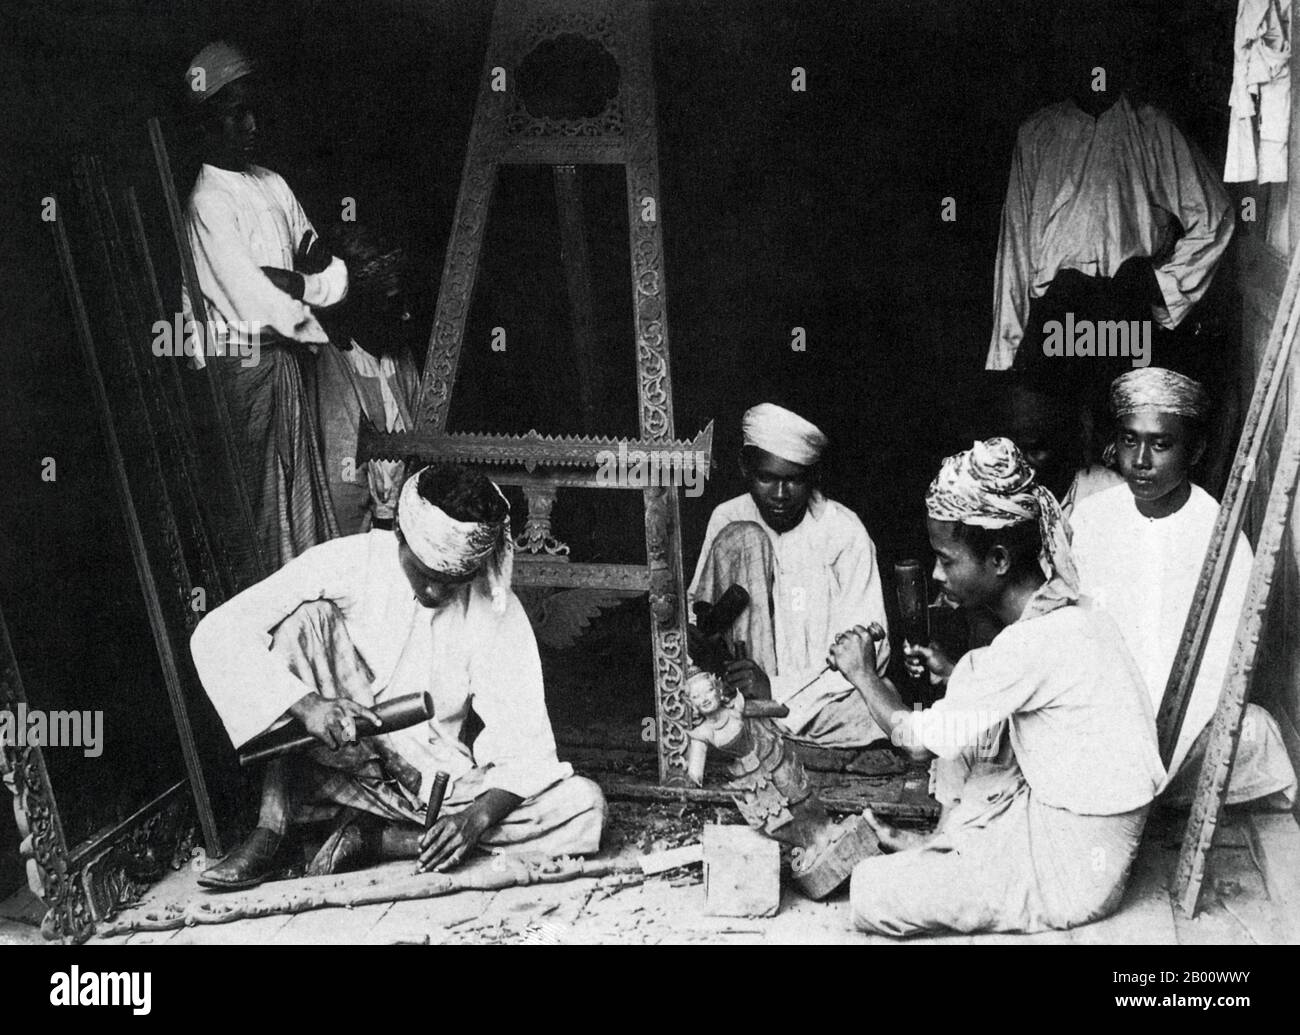 Burma/Myanmar: A 1903 photograph of craftsmen carving wood in a workshop in Kengtung, Shan State.  Located in the northeast of the country, Shan State covers one-quarter of Burma’s land mass. It was traditionally separated into principalities and is mostly comprised of ethnic Shan, Burman Pa-O, Intha, Taungyo, Danu, Palaung and Kachin peoples. Stock Photo